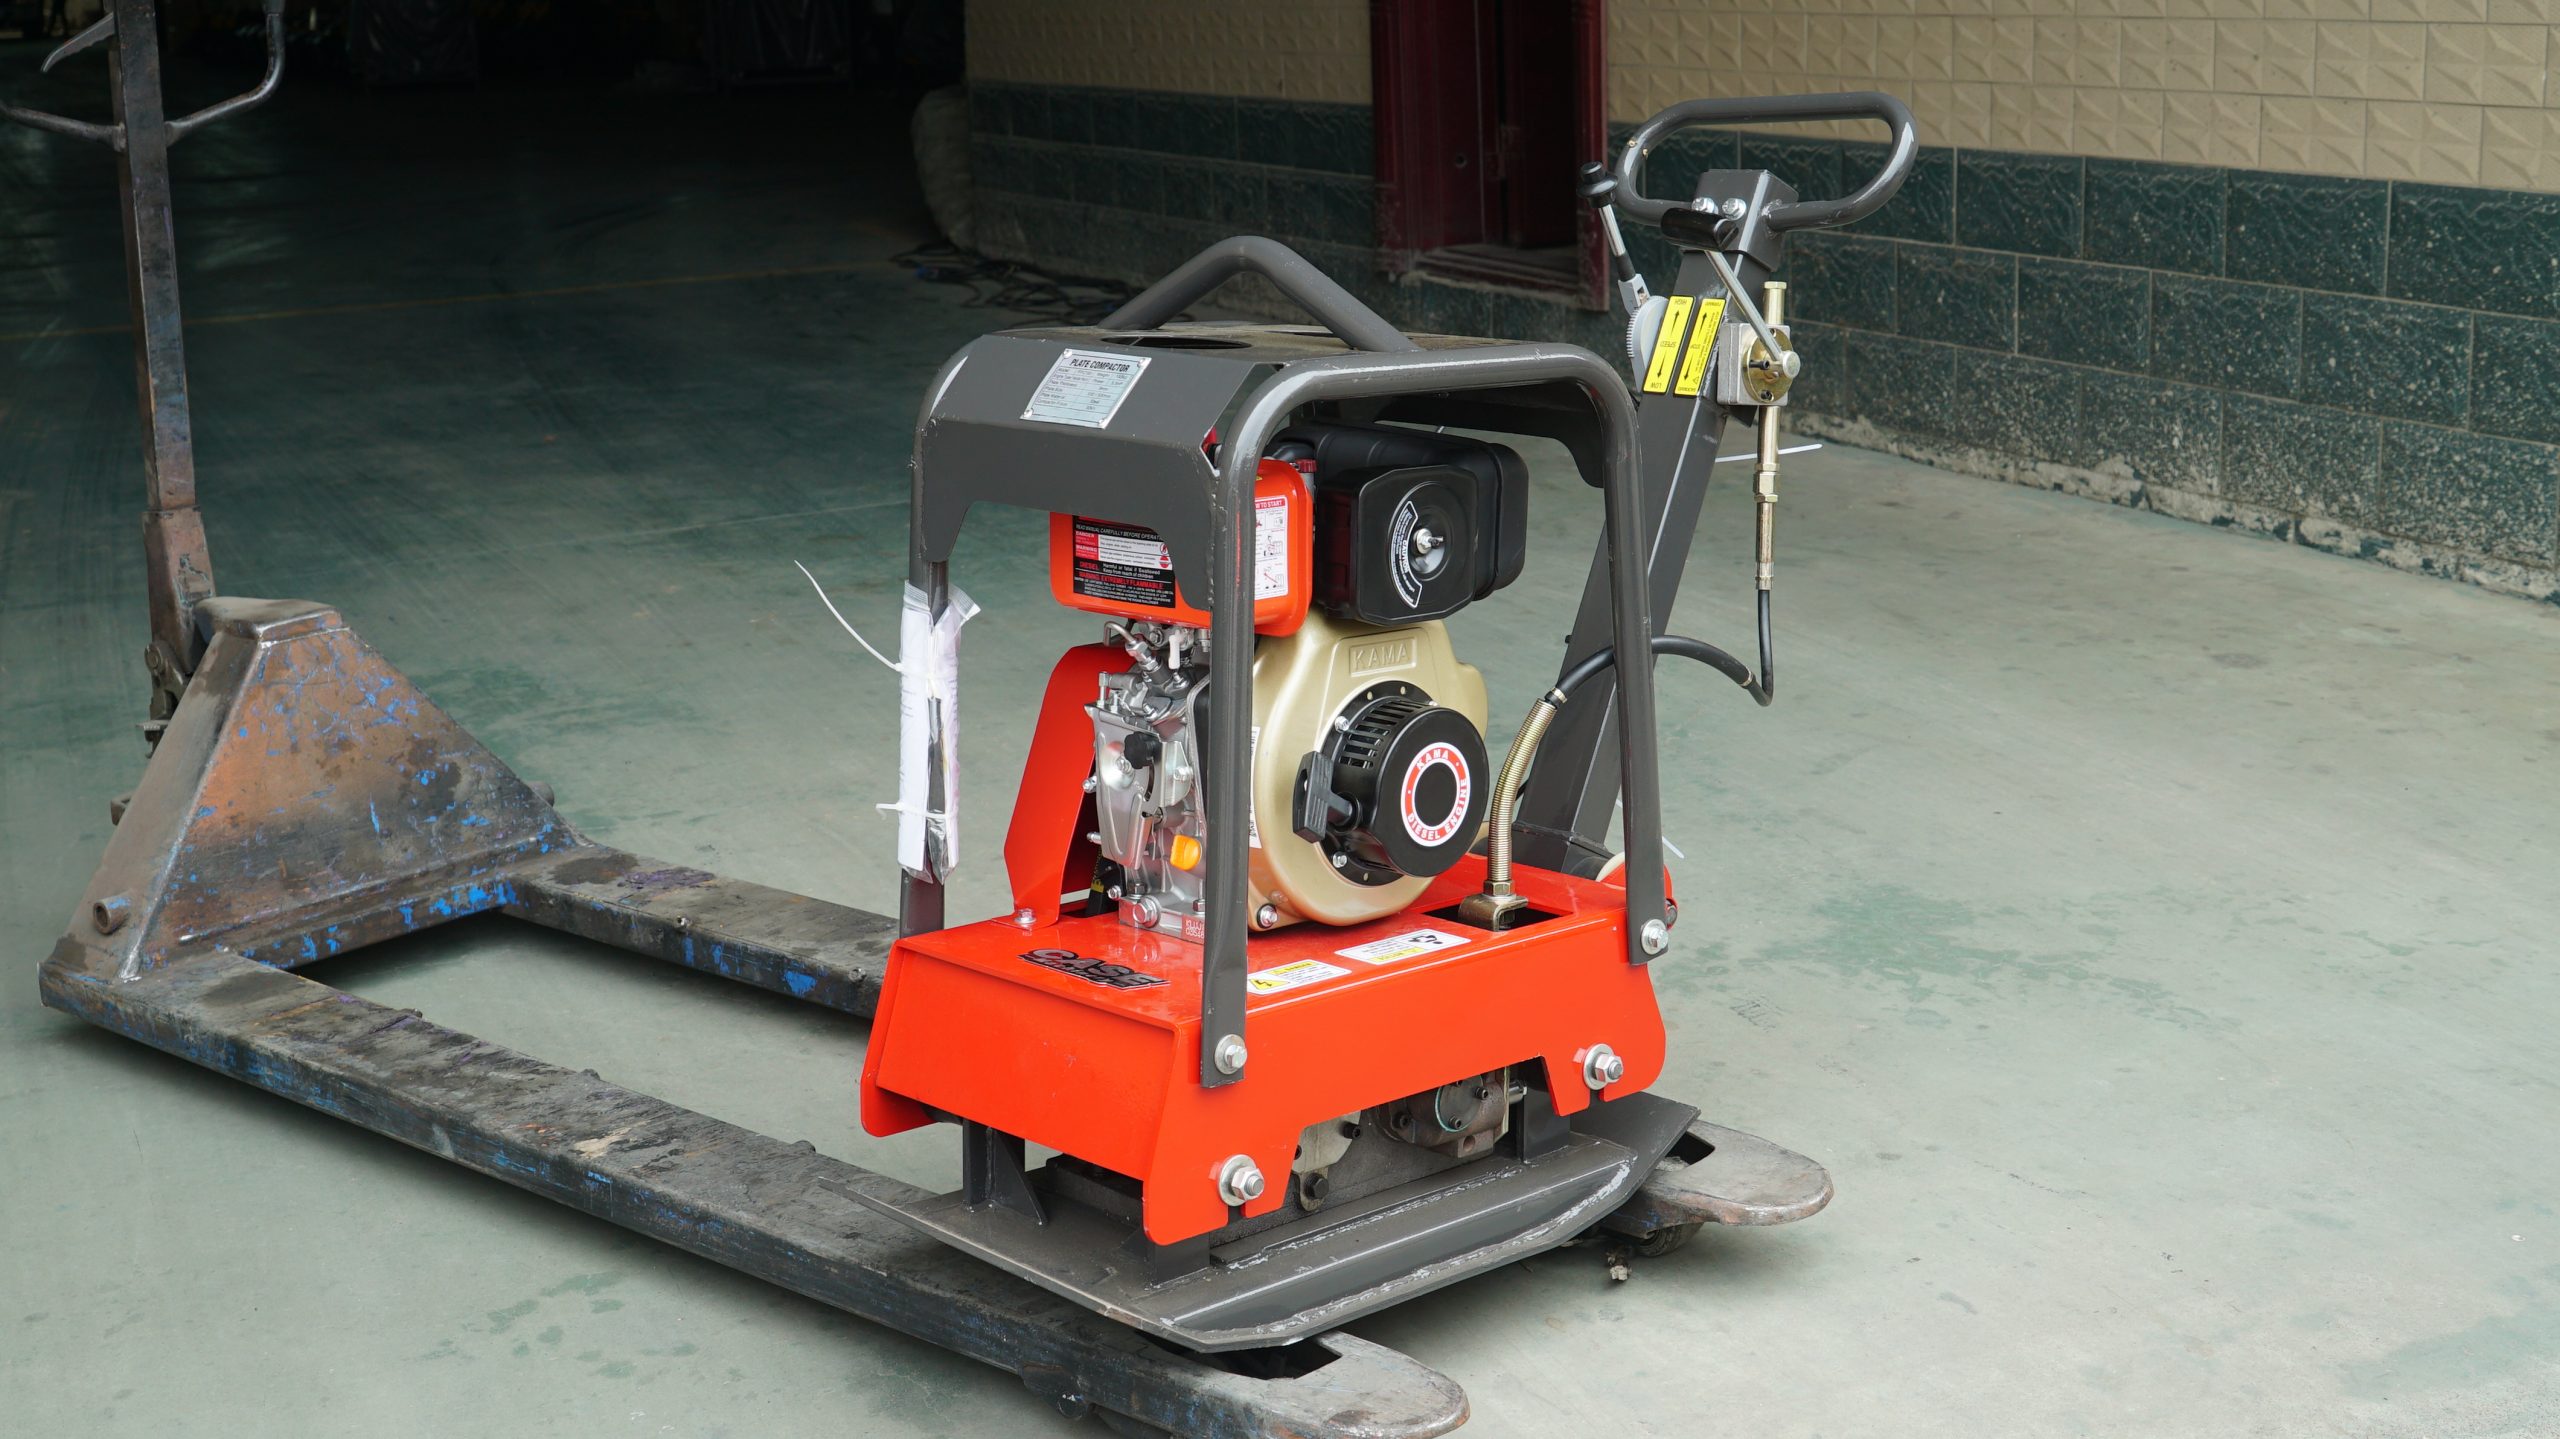 https://californiatoolsandequipment.com/blogs/news/everything-construction-vibrating-plate-compactors-buying-guide